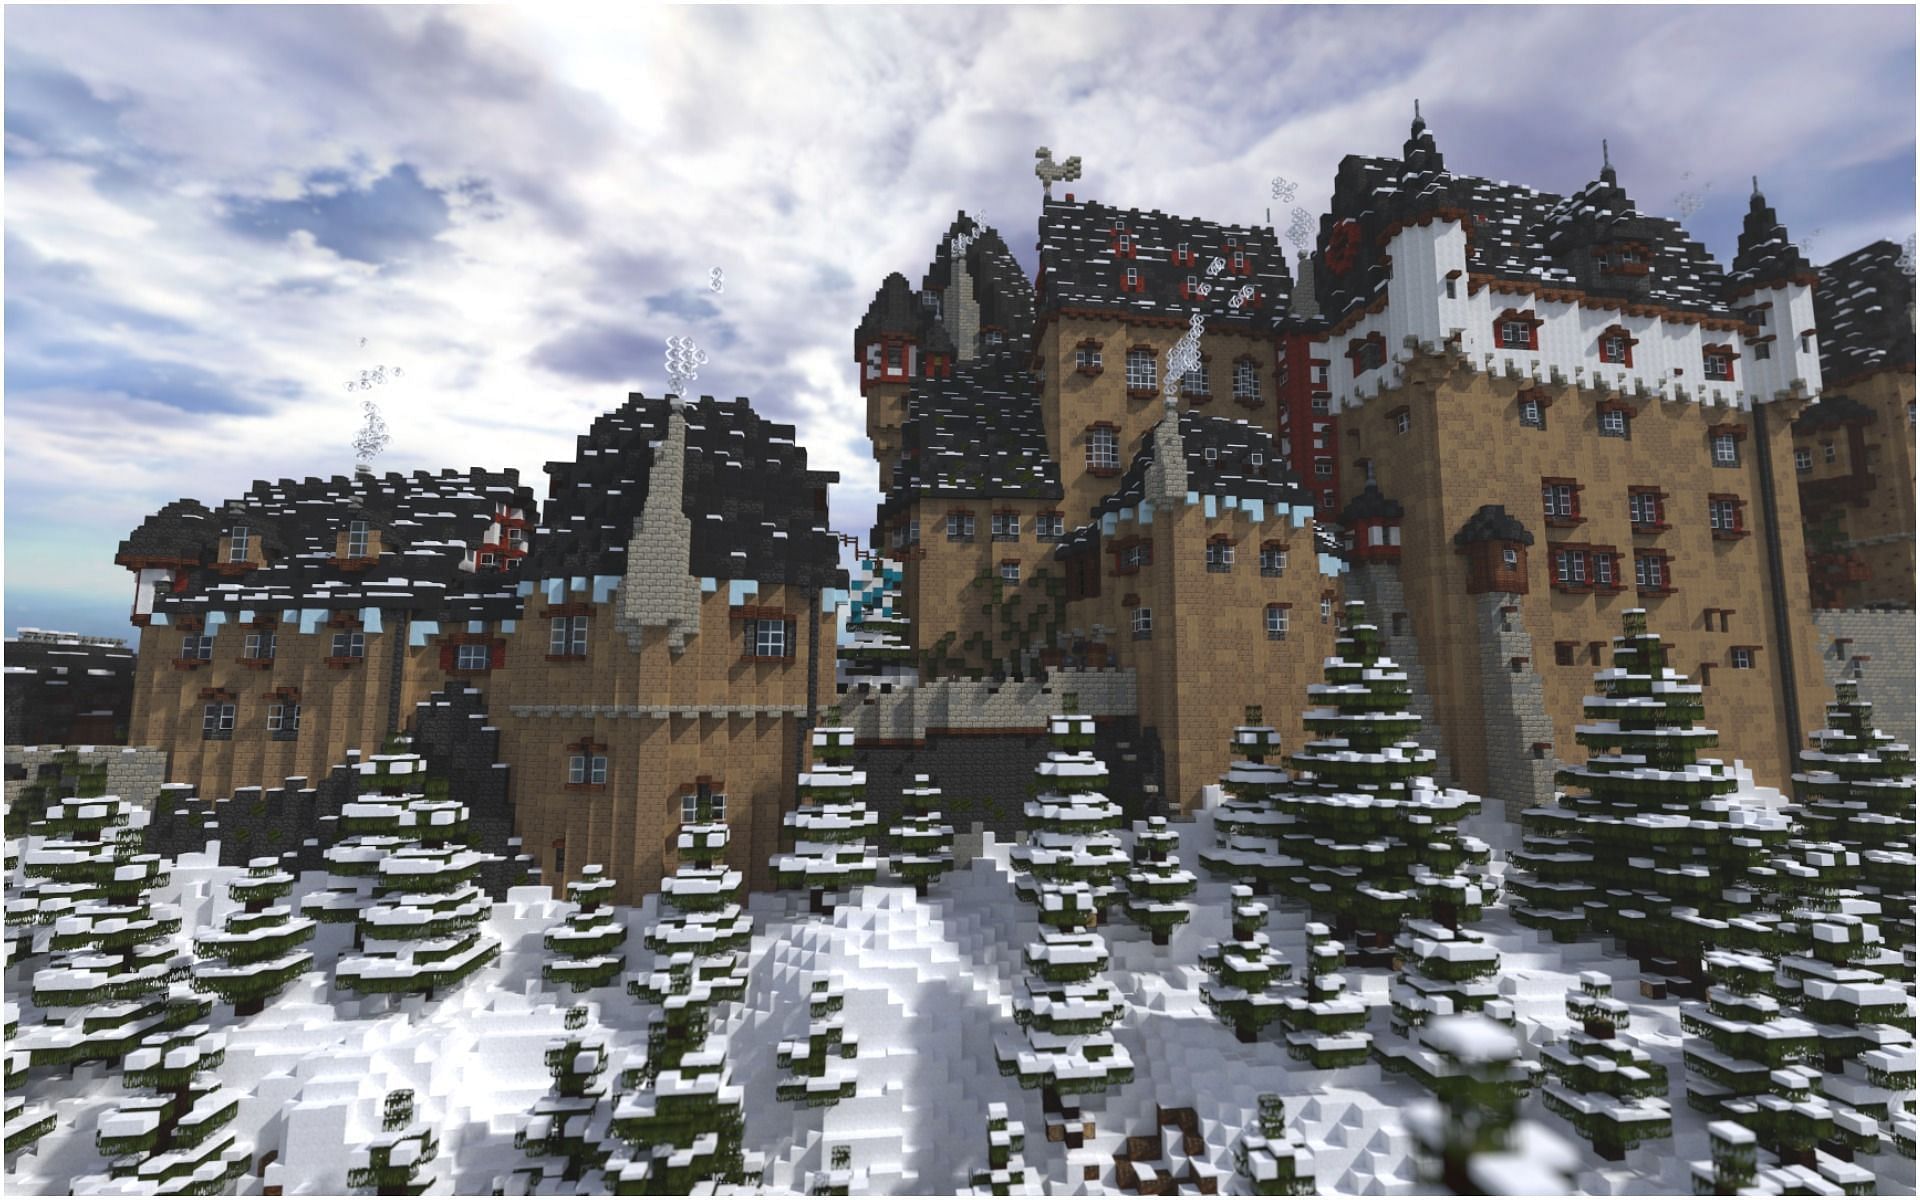 Minecraft players work on tons of different builds (Image via minecraftforum.net/Sounas and Doublenum)